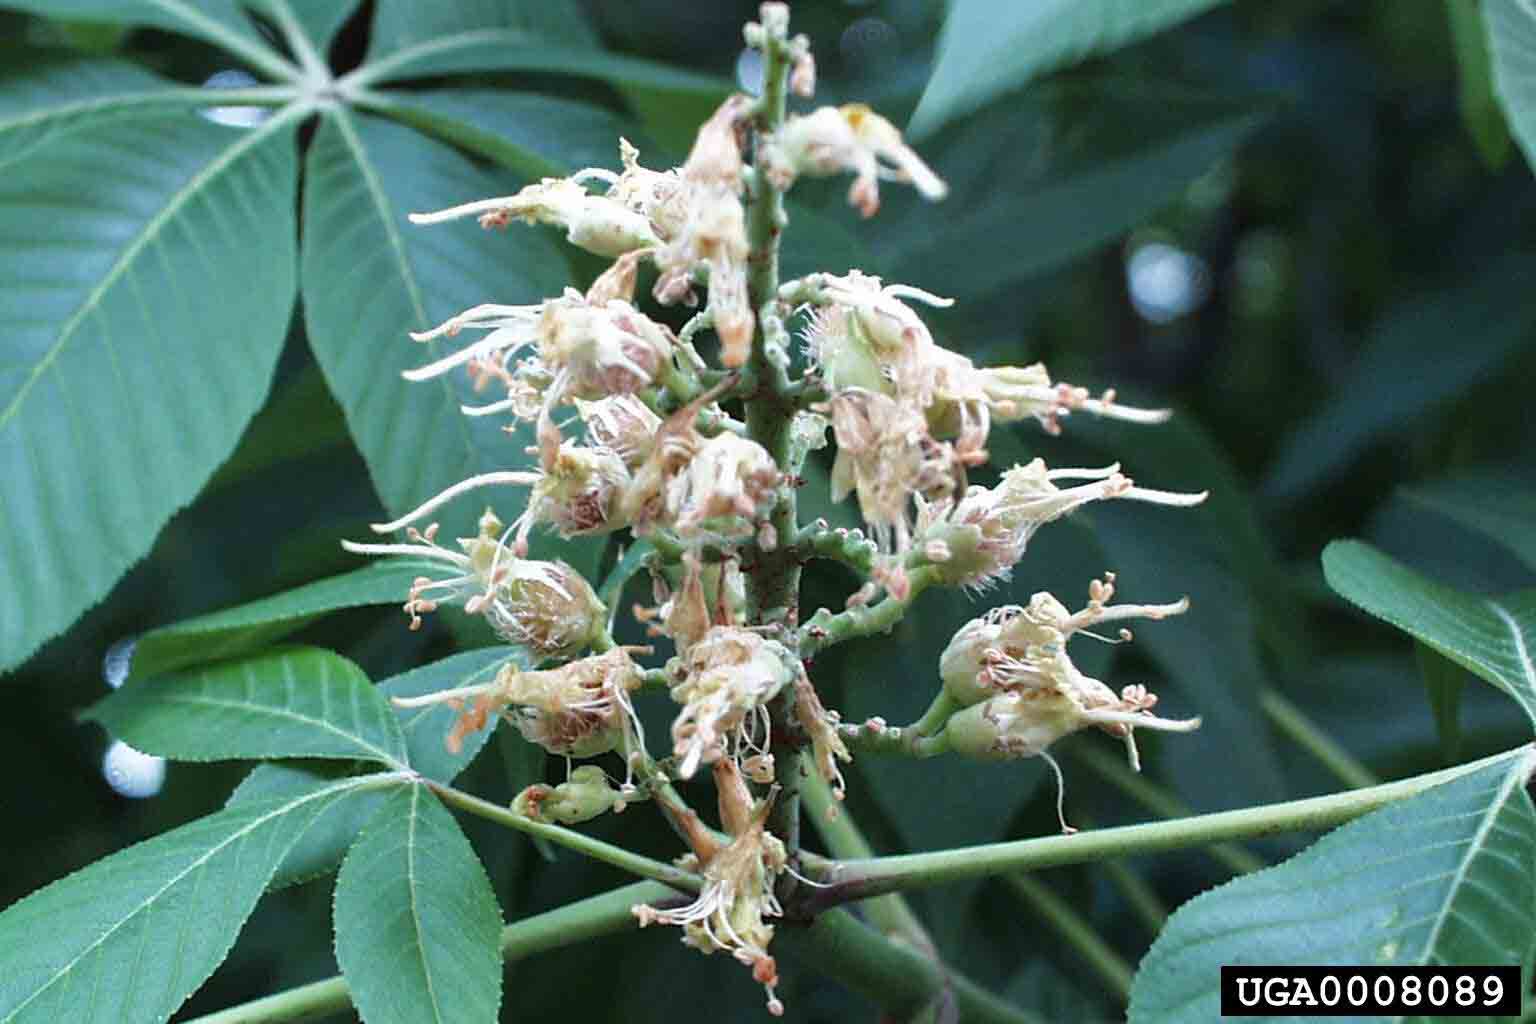 Common horsechestnut flowers in panicle